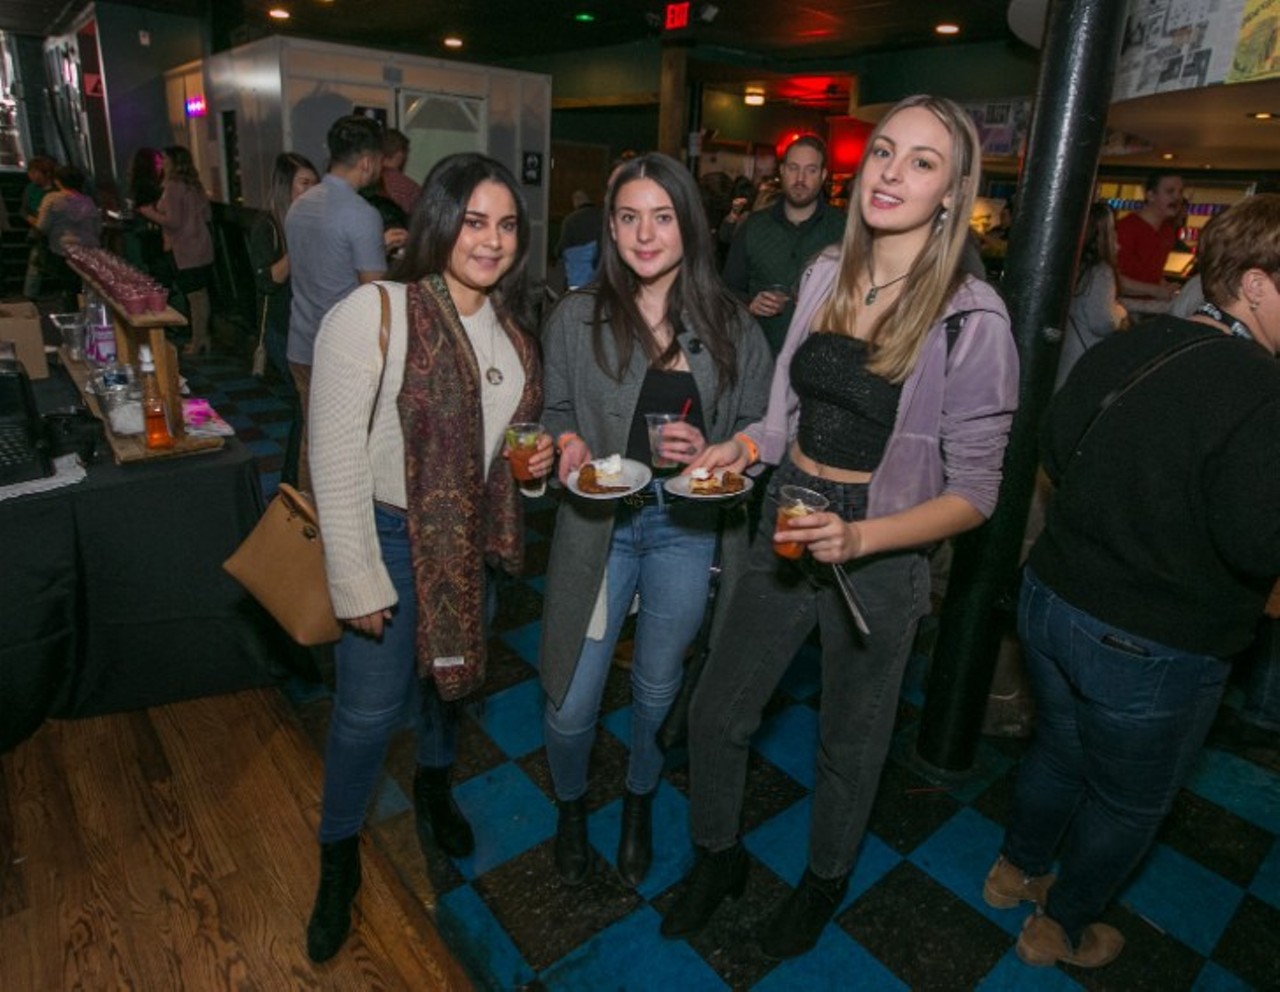 Everything we saw at Metro Times' United We Brunch event at the Majestic Complex